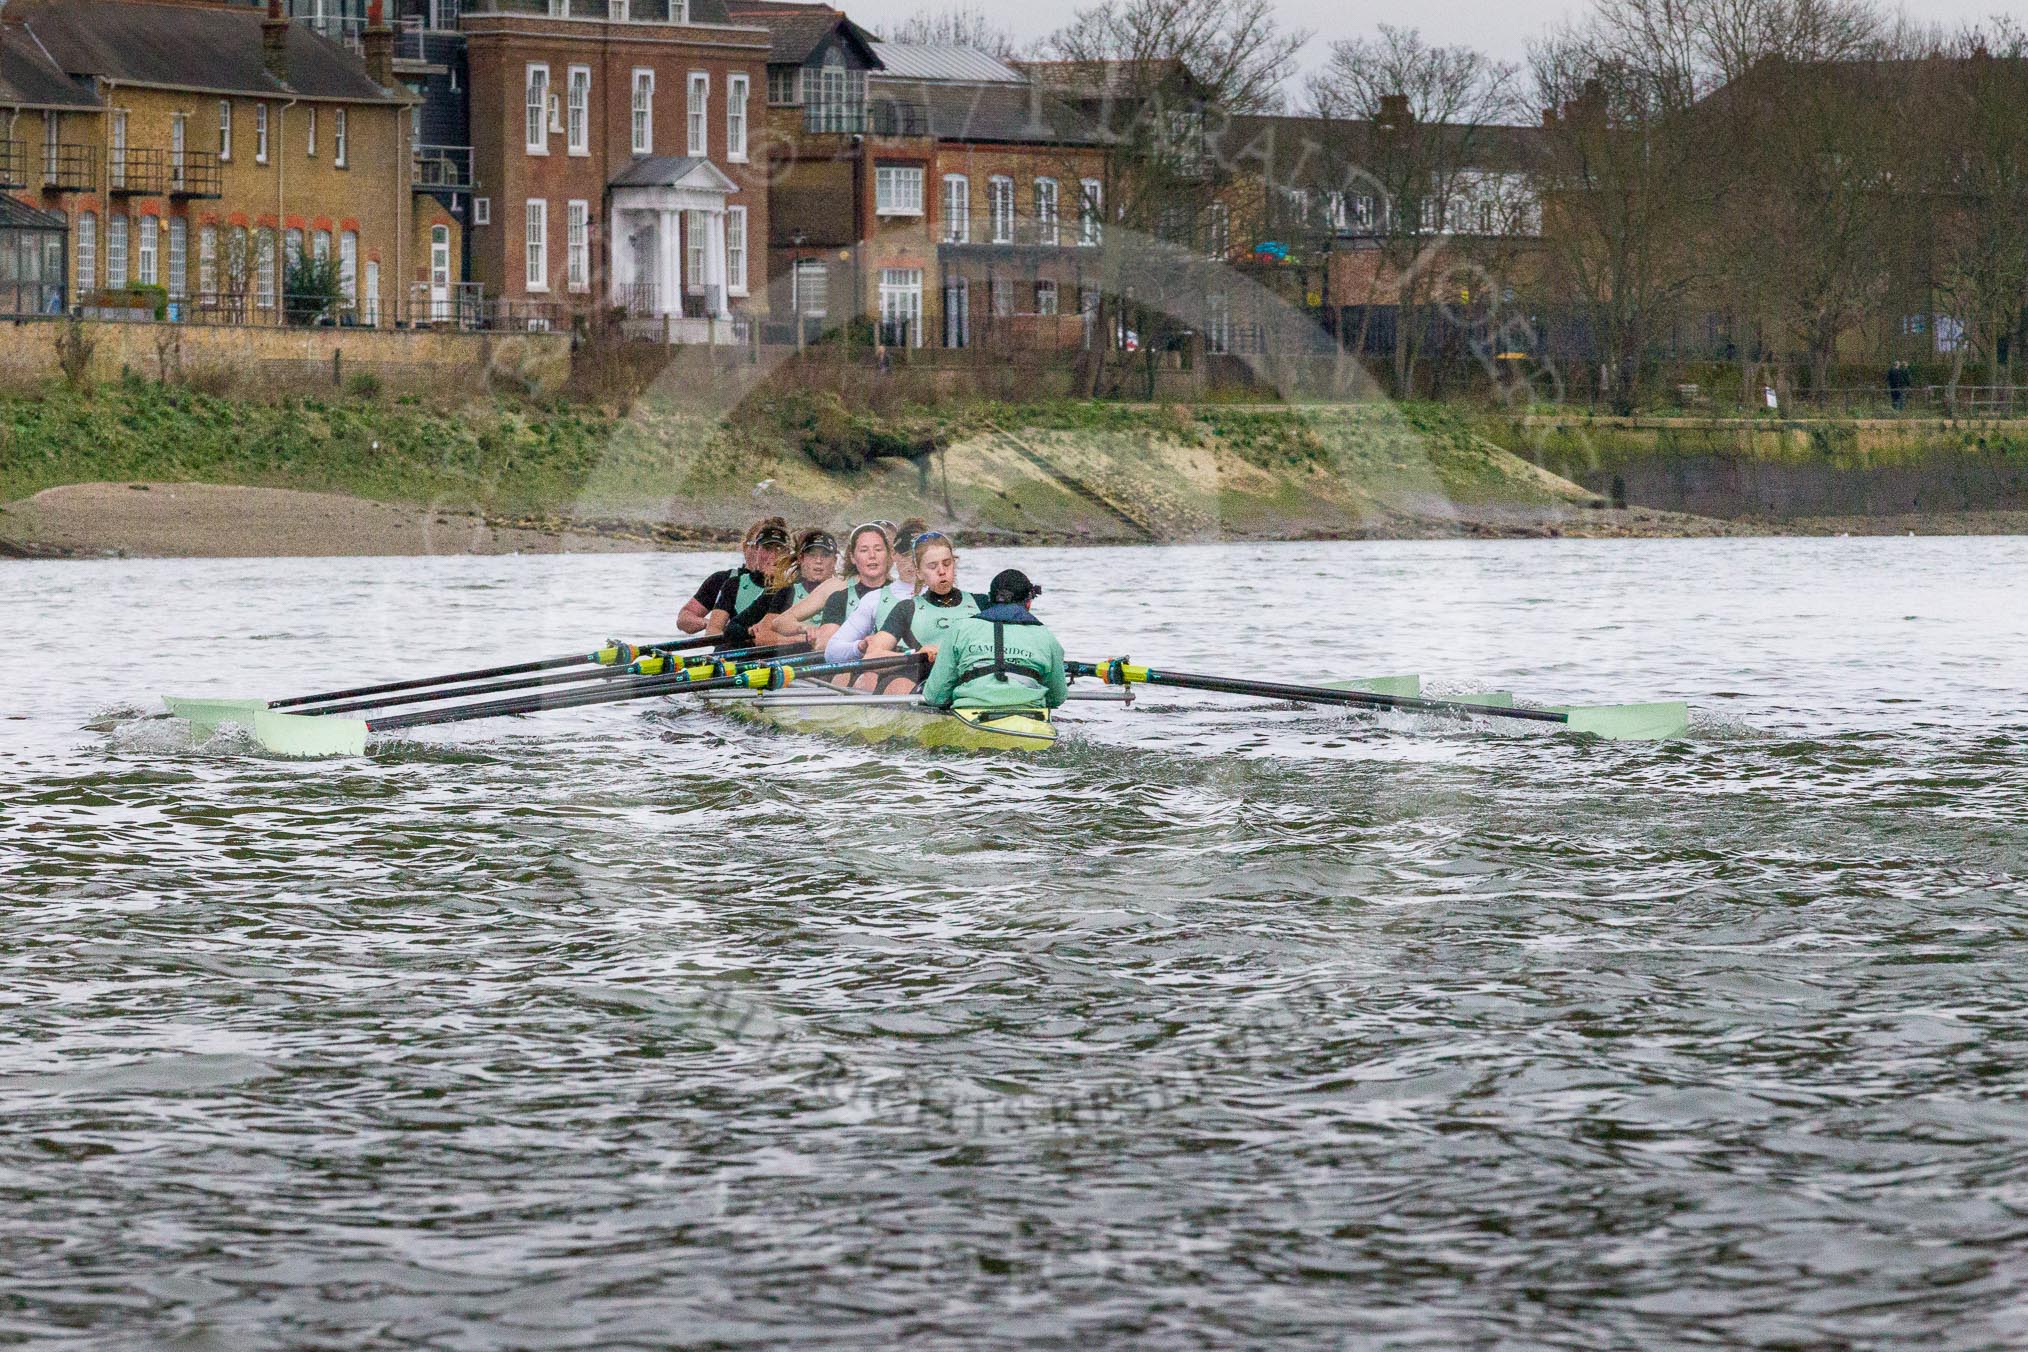 The Boat Race season 2017 - Women's Boat Race Fixture CUWBC vs Univerity of London: The CUWBC eight, leading by well over a length after Barnes Bridge during the 2nd piece of the fixture.
River Thames between Putney Bridge and Mortlake,
London SW15,

United Kingdom,
on 19 February 2017 at 16:24, image #130